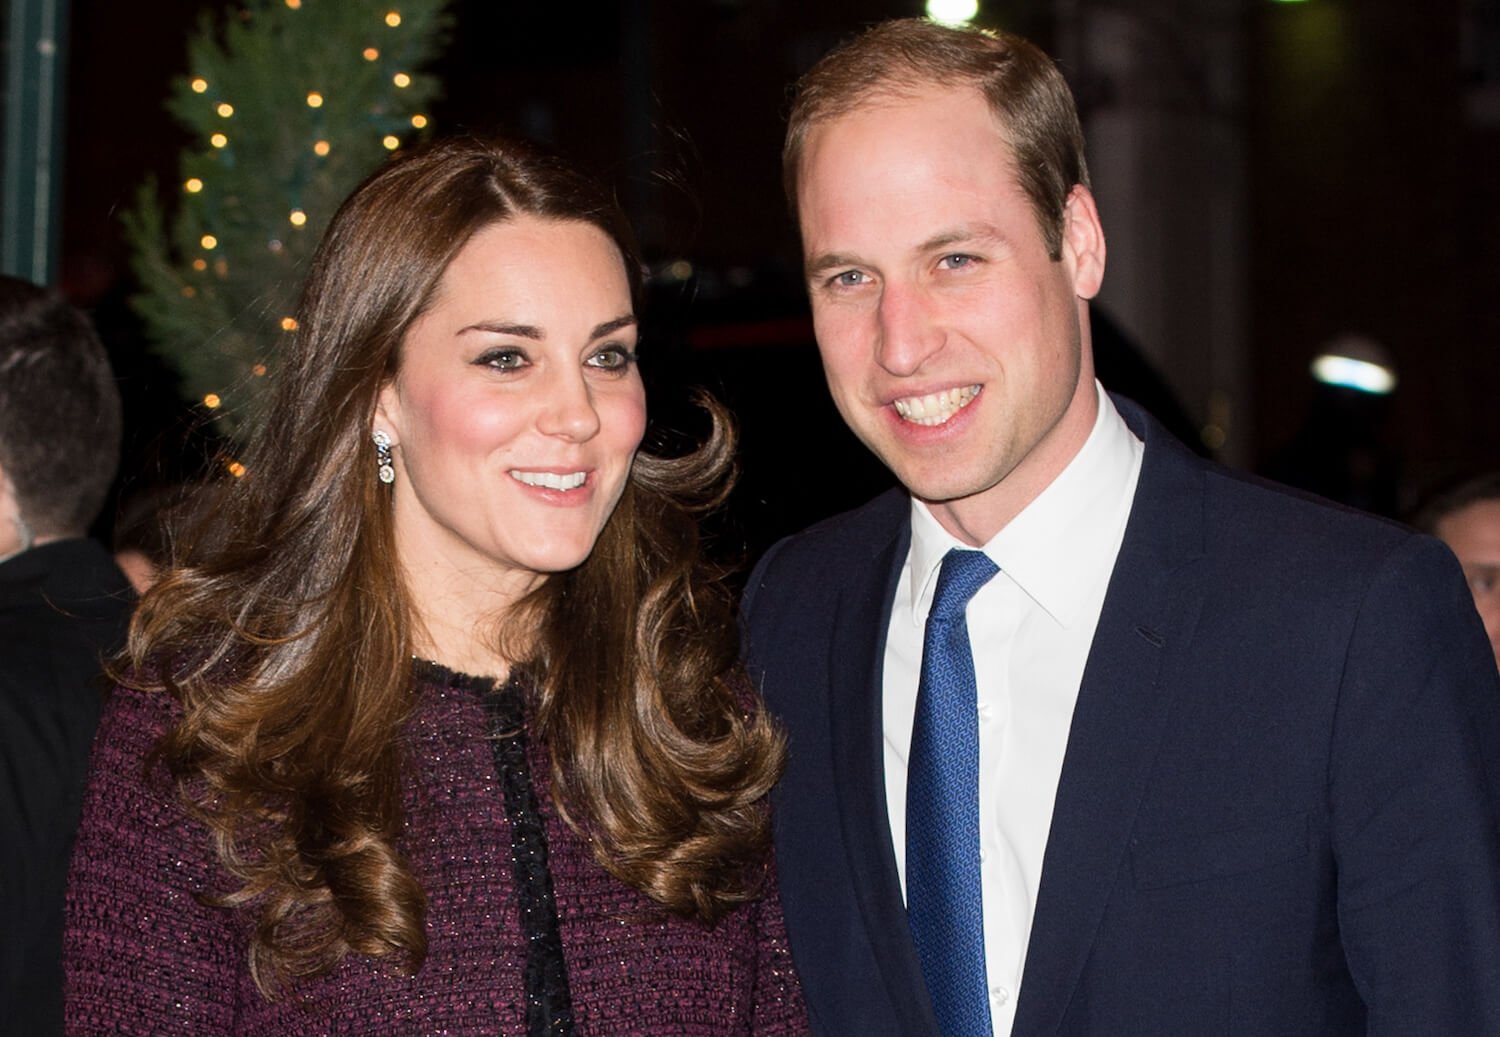 Kate Middleton and Prince William smile while standing together